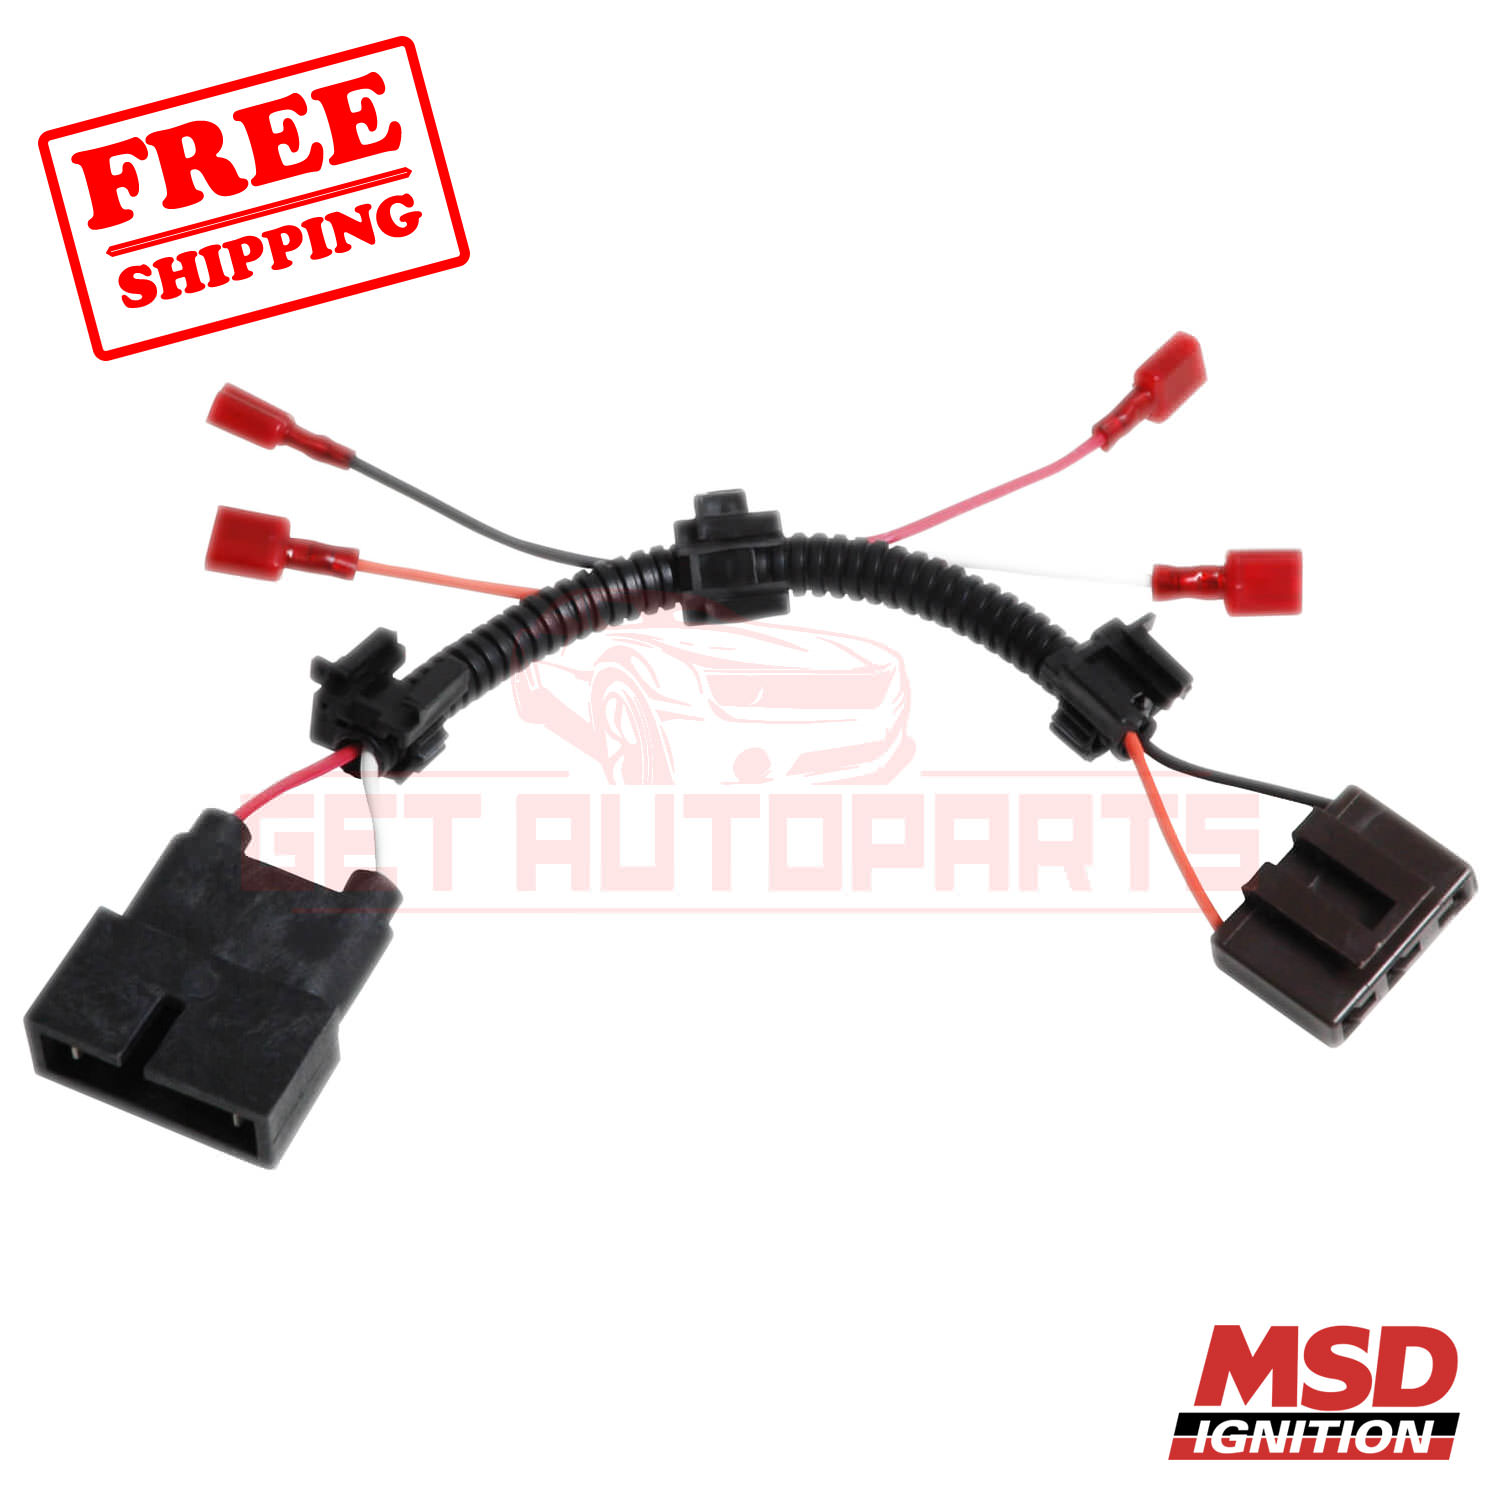 MSD Engine Wiring Harness for Ford Mustang 1984-1995 | eBay